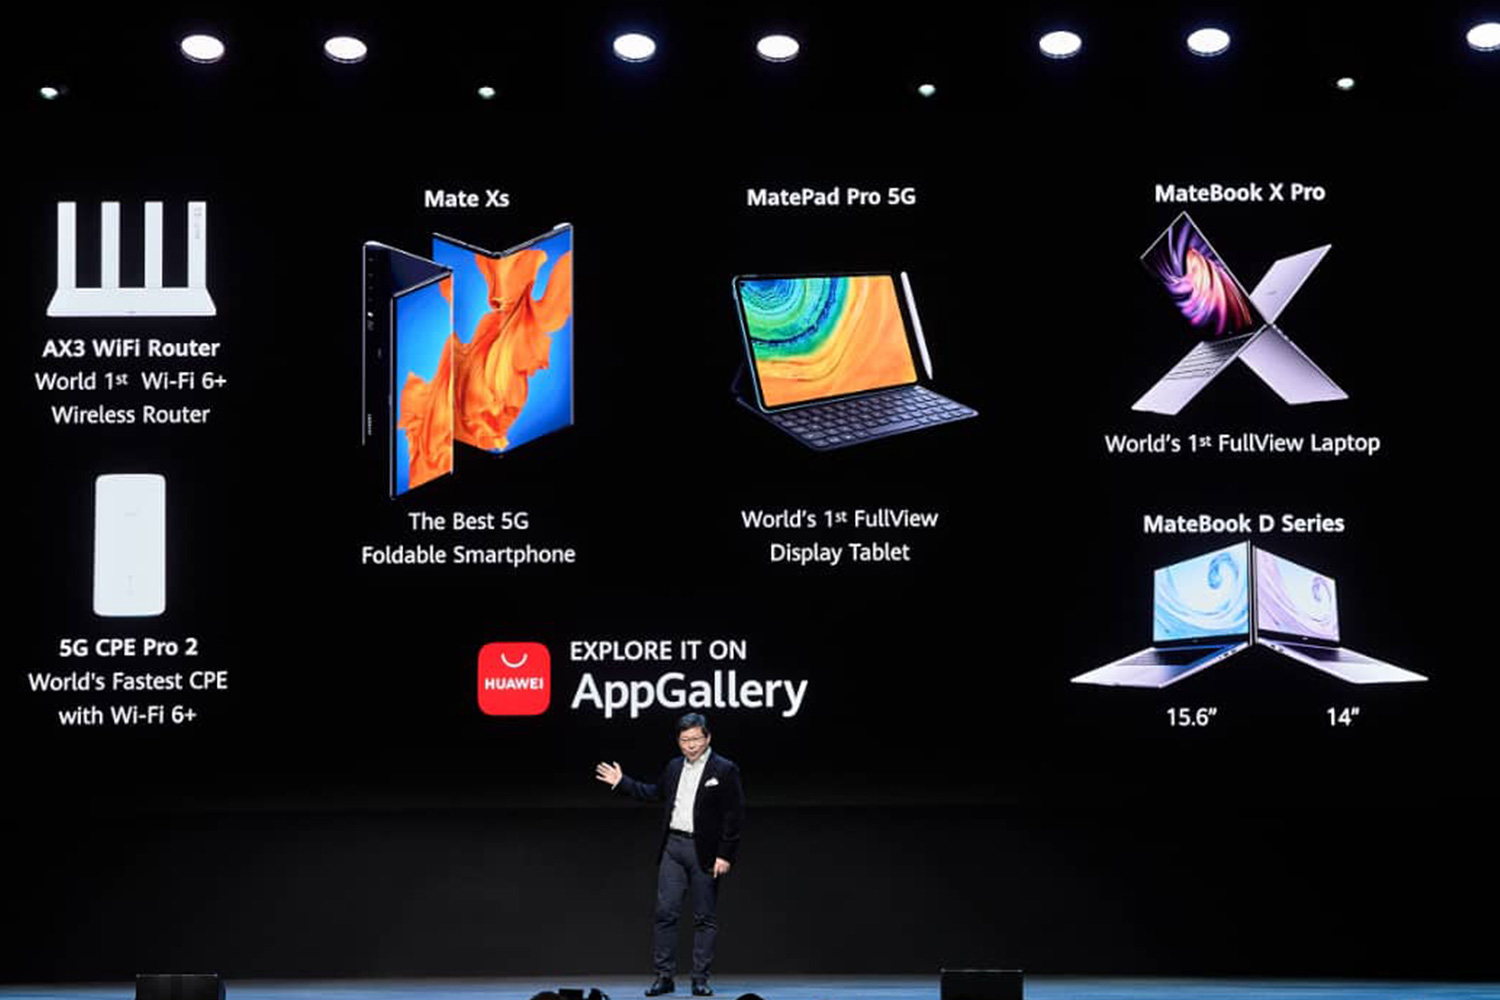 HUAWEI Product and Strategy Virtual Launch 2020: Everything You Need to Know